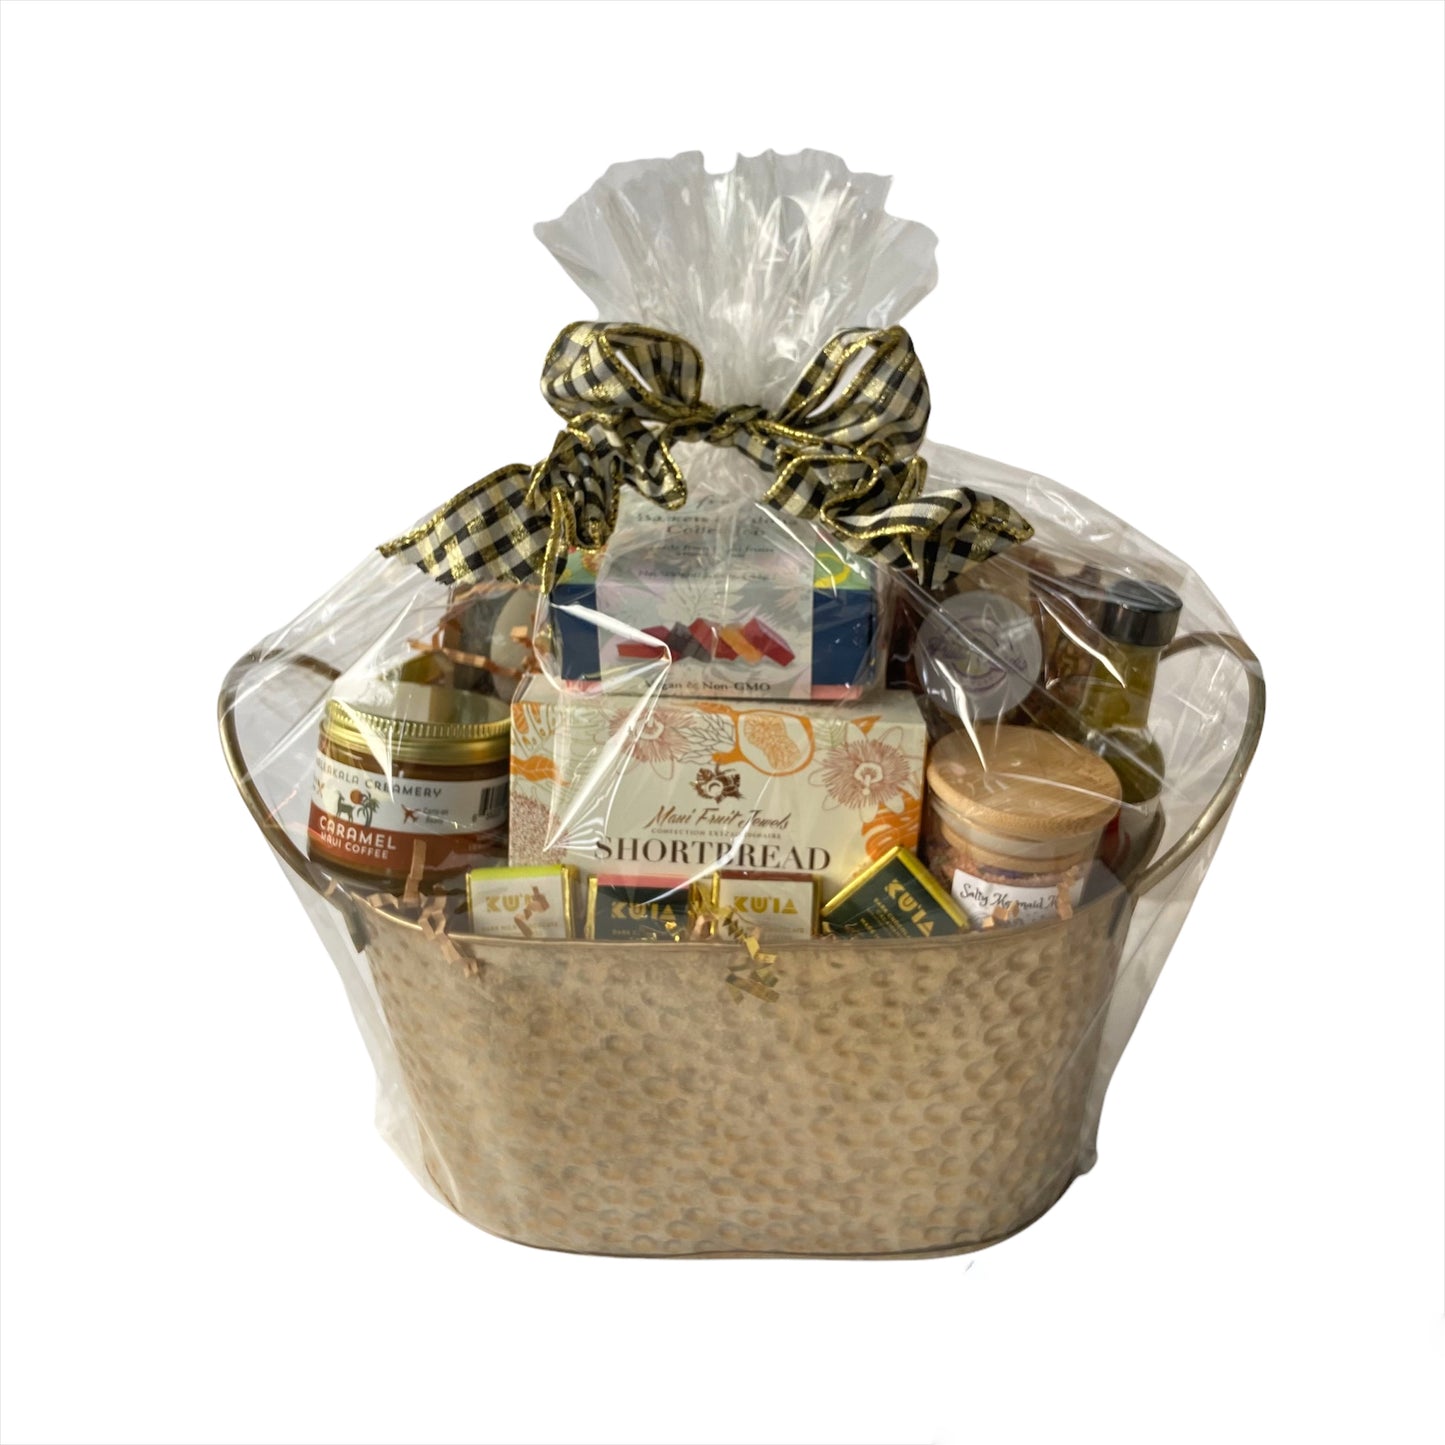 Deluxe Culinary Basket